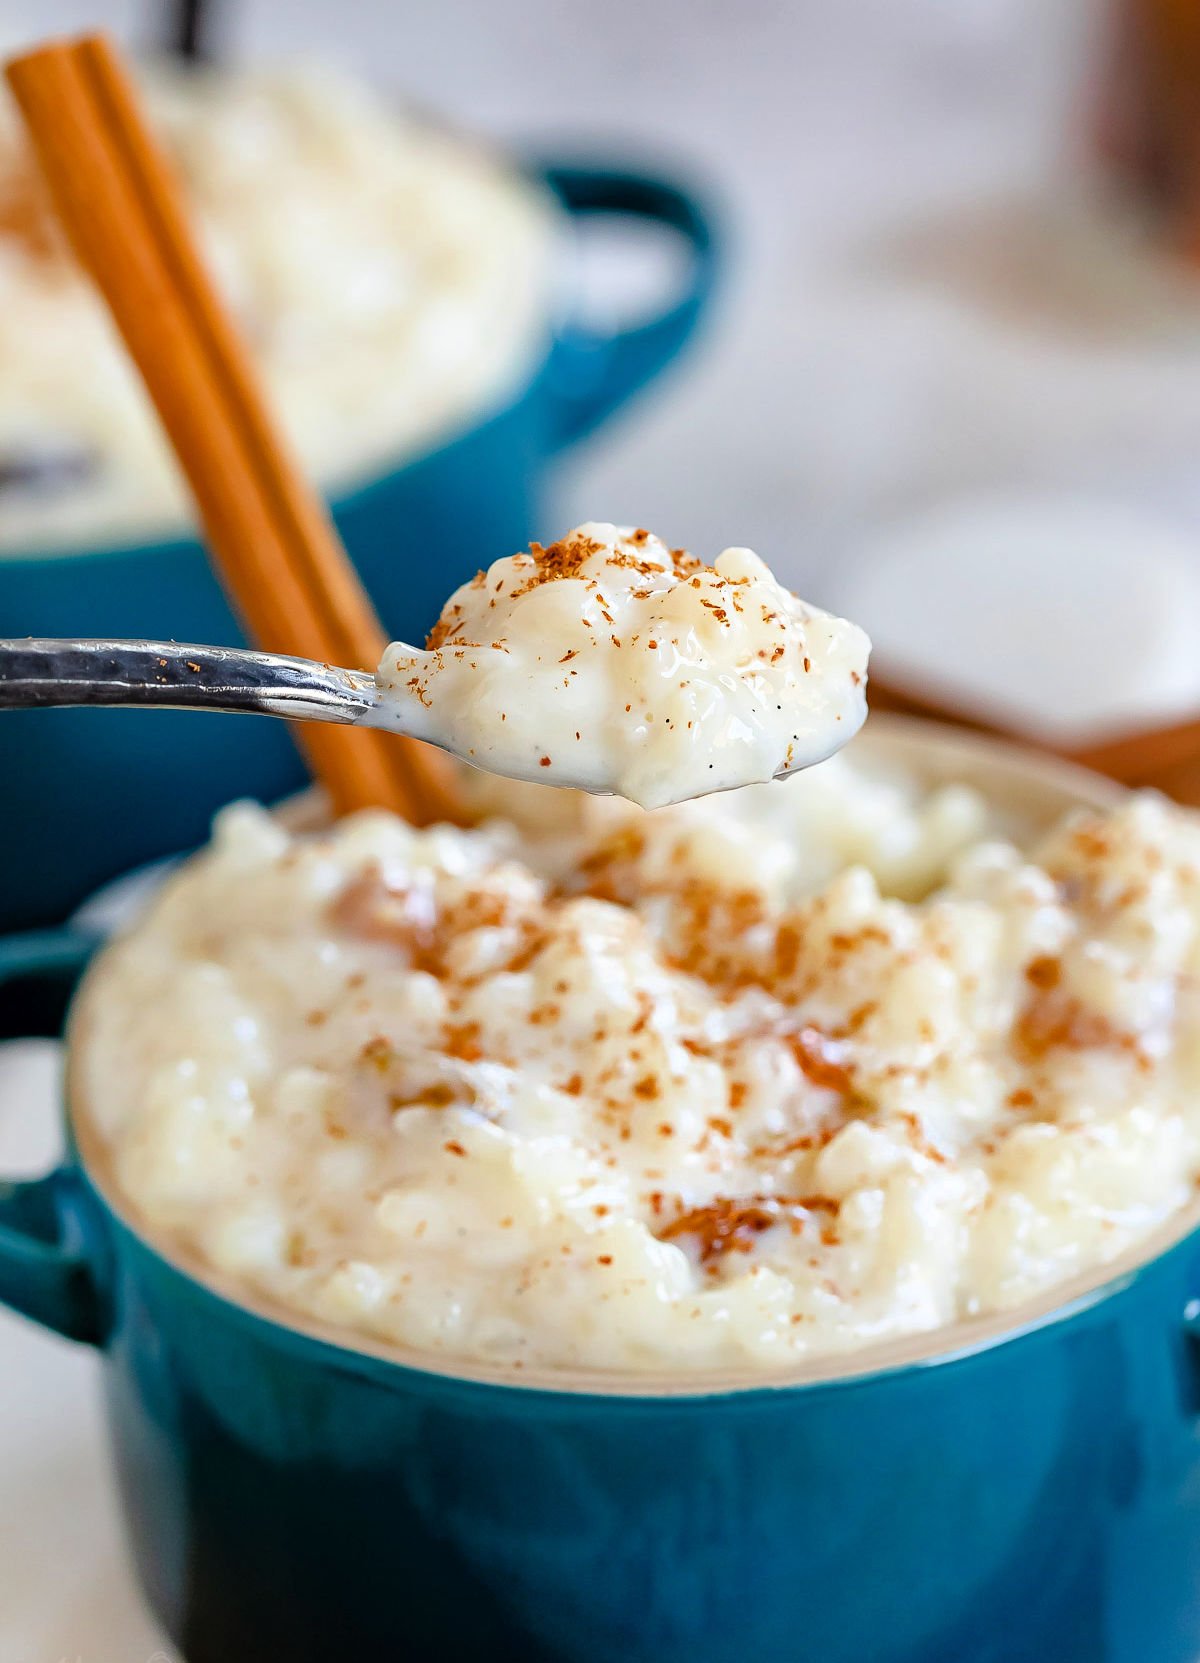 small spoonful of rice pudding held over a small teal bowl of rice pudding. ground cinnamon sprinkled on top.